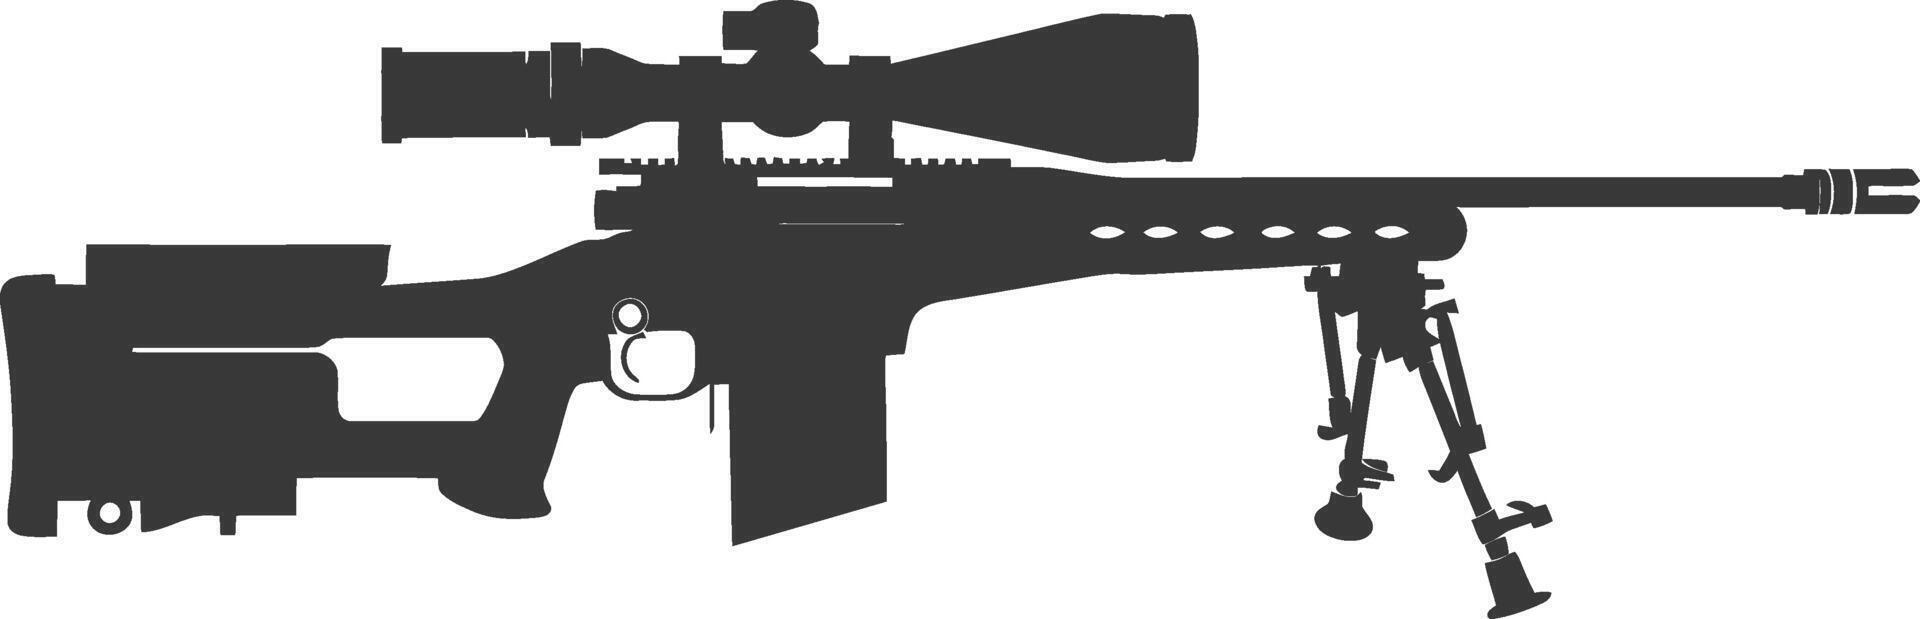 Silhouette Sniper rifle gun military weapon black color only vector